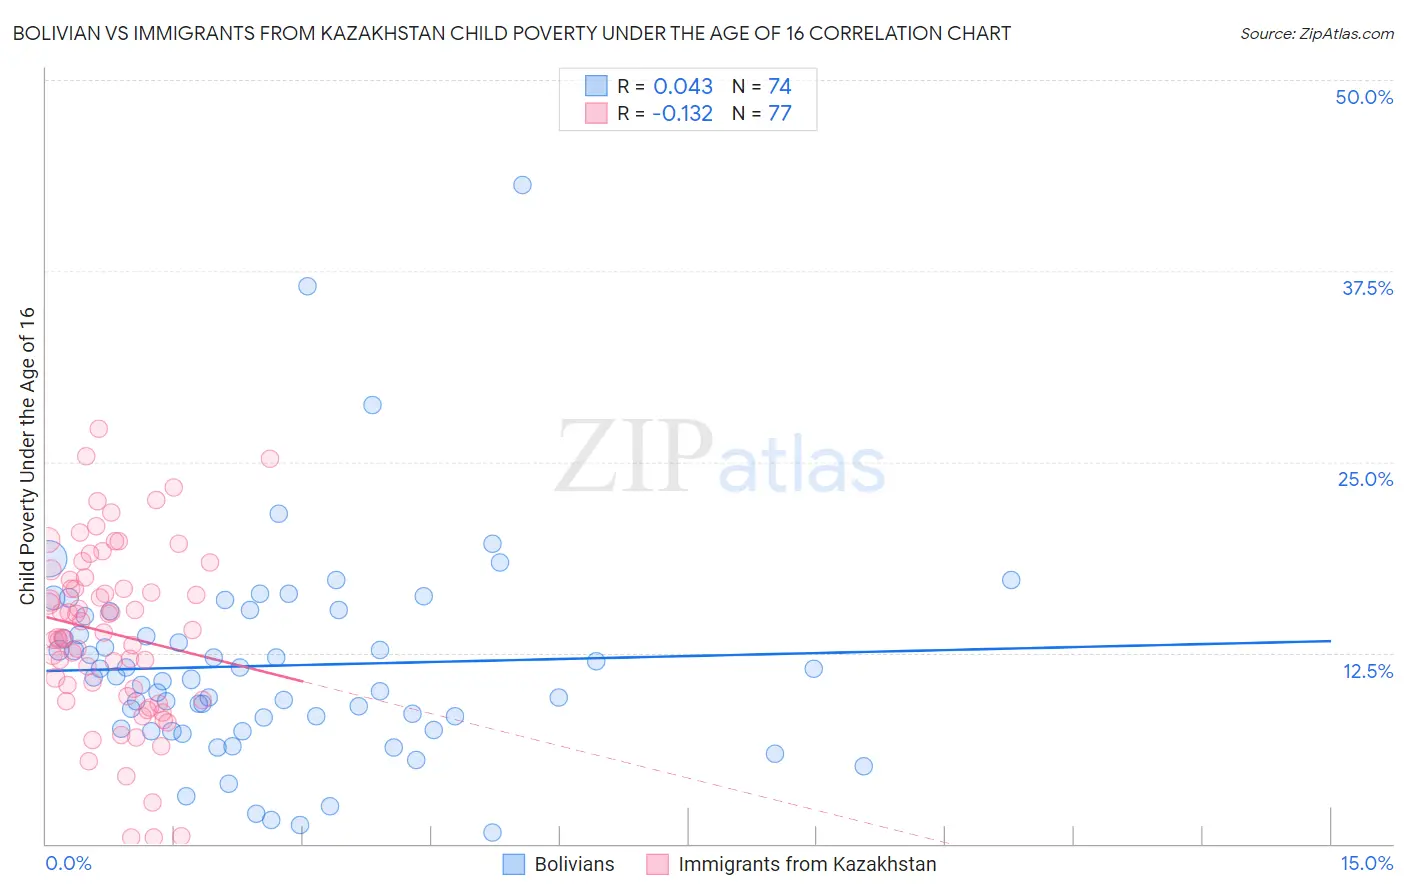 Bolivian vs Immigrants from Kazakhstan Child Poverty Under the Age of 16